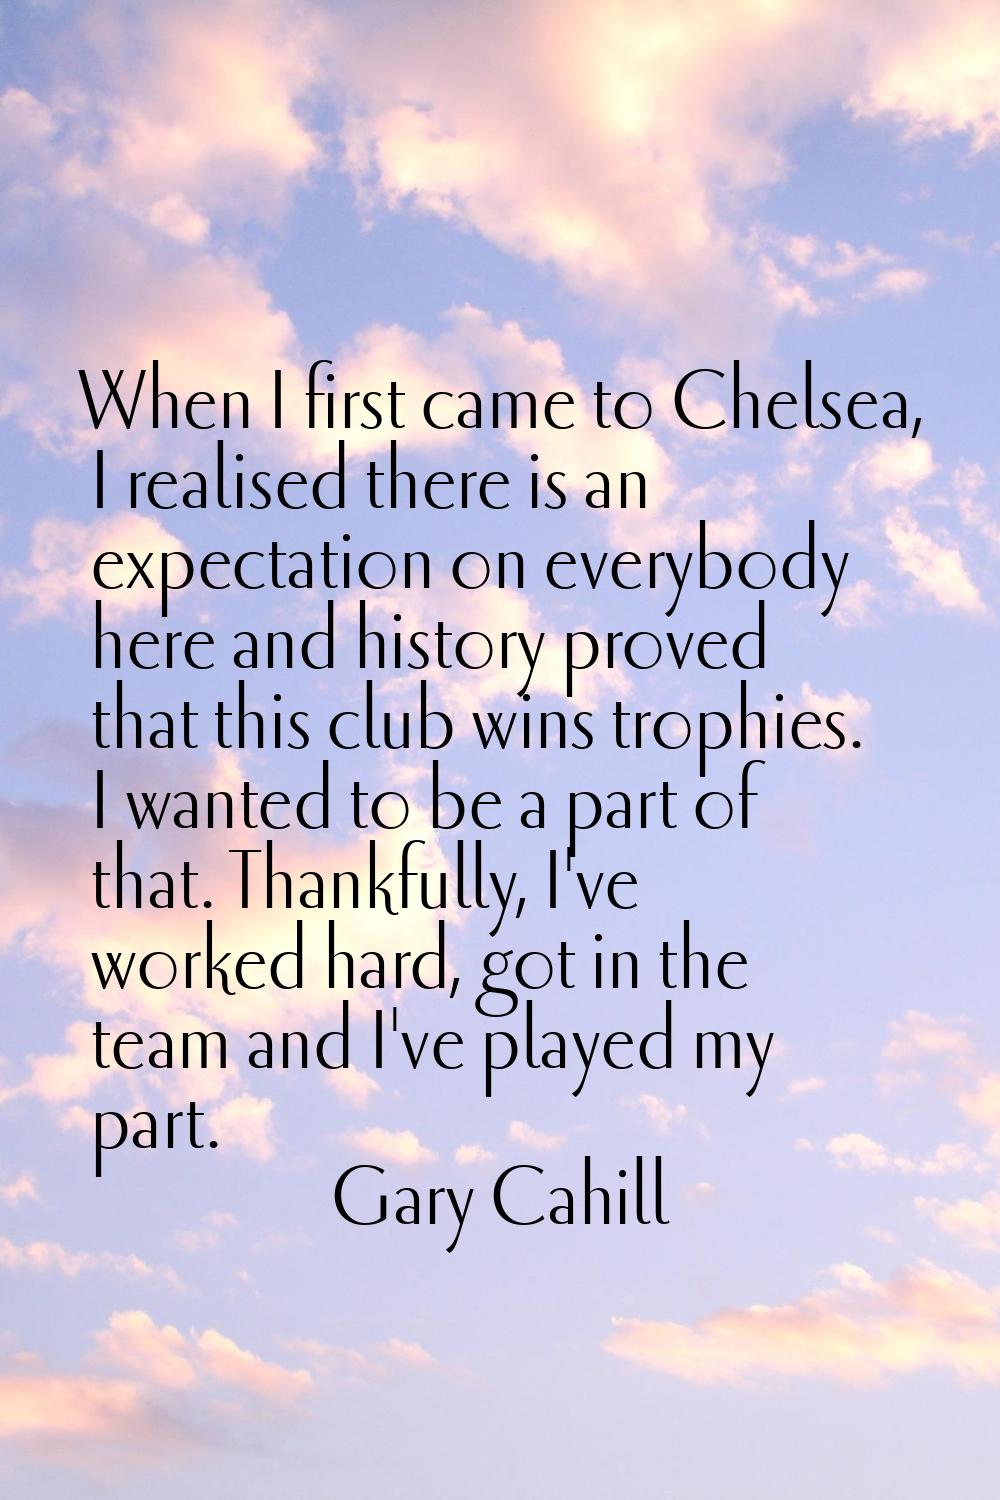 When I first came to Chelsea, I realised there is an expectation on everybody here and history prov